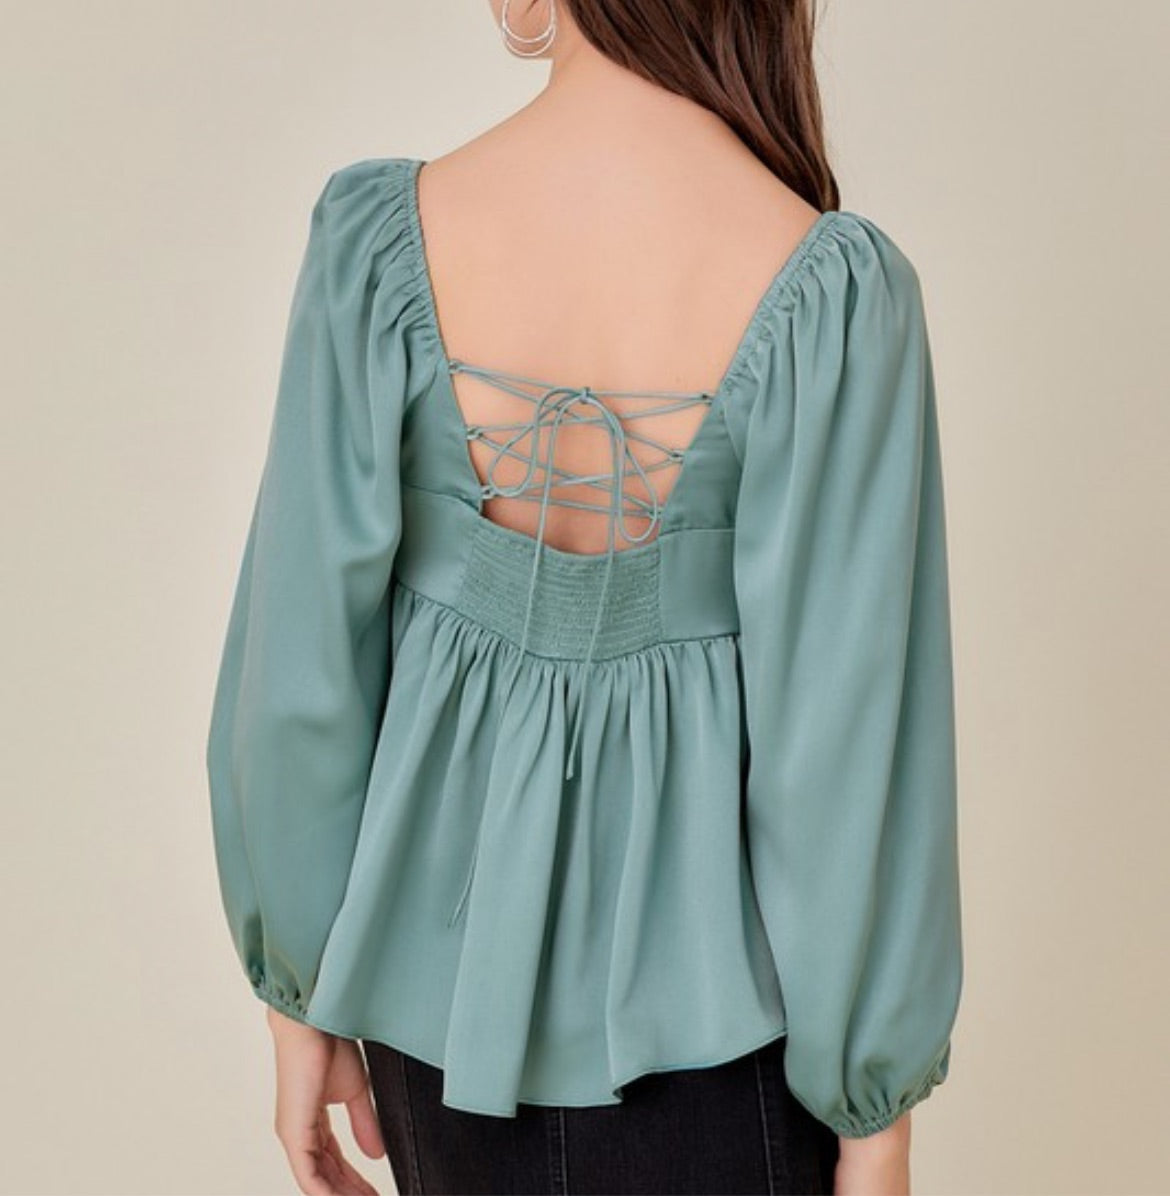 V Trimmed Backed Laced Peplum Top